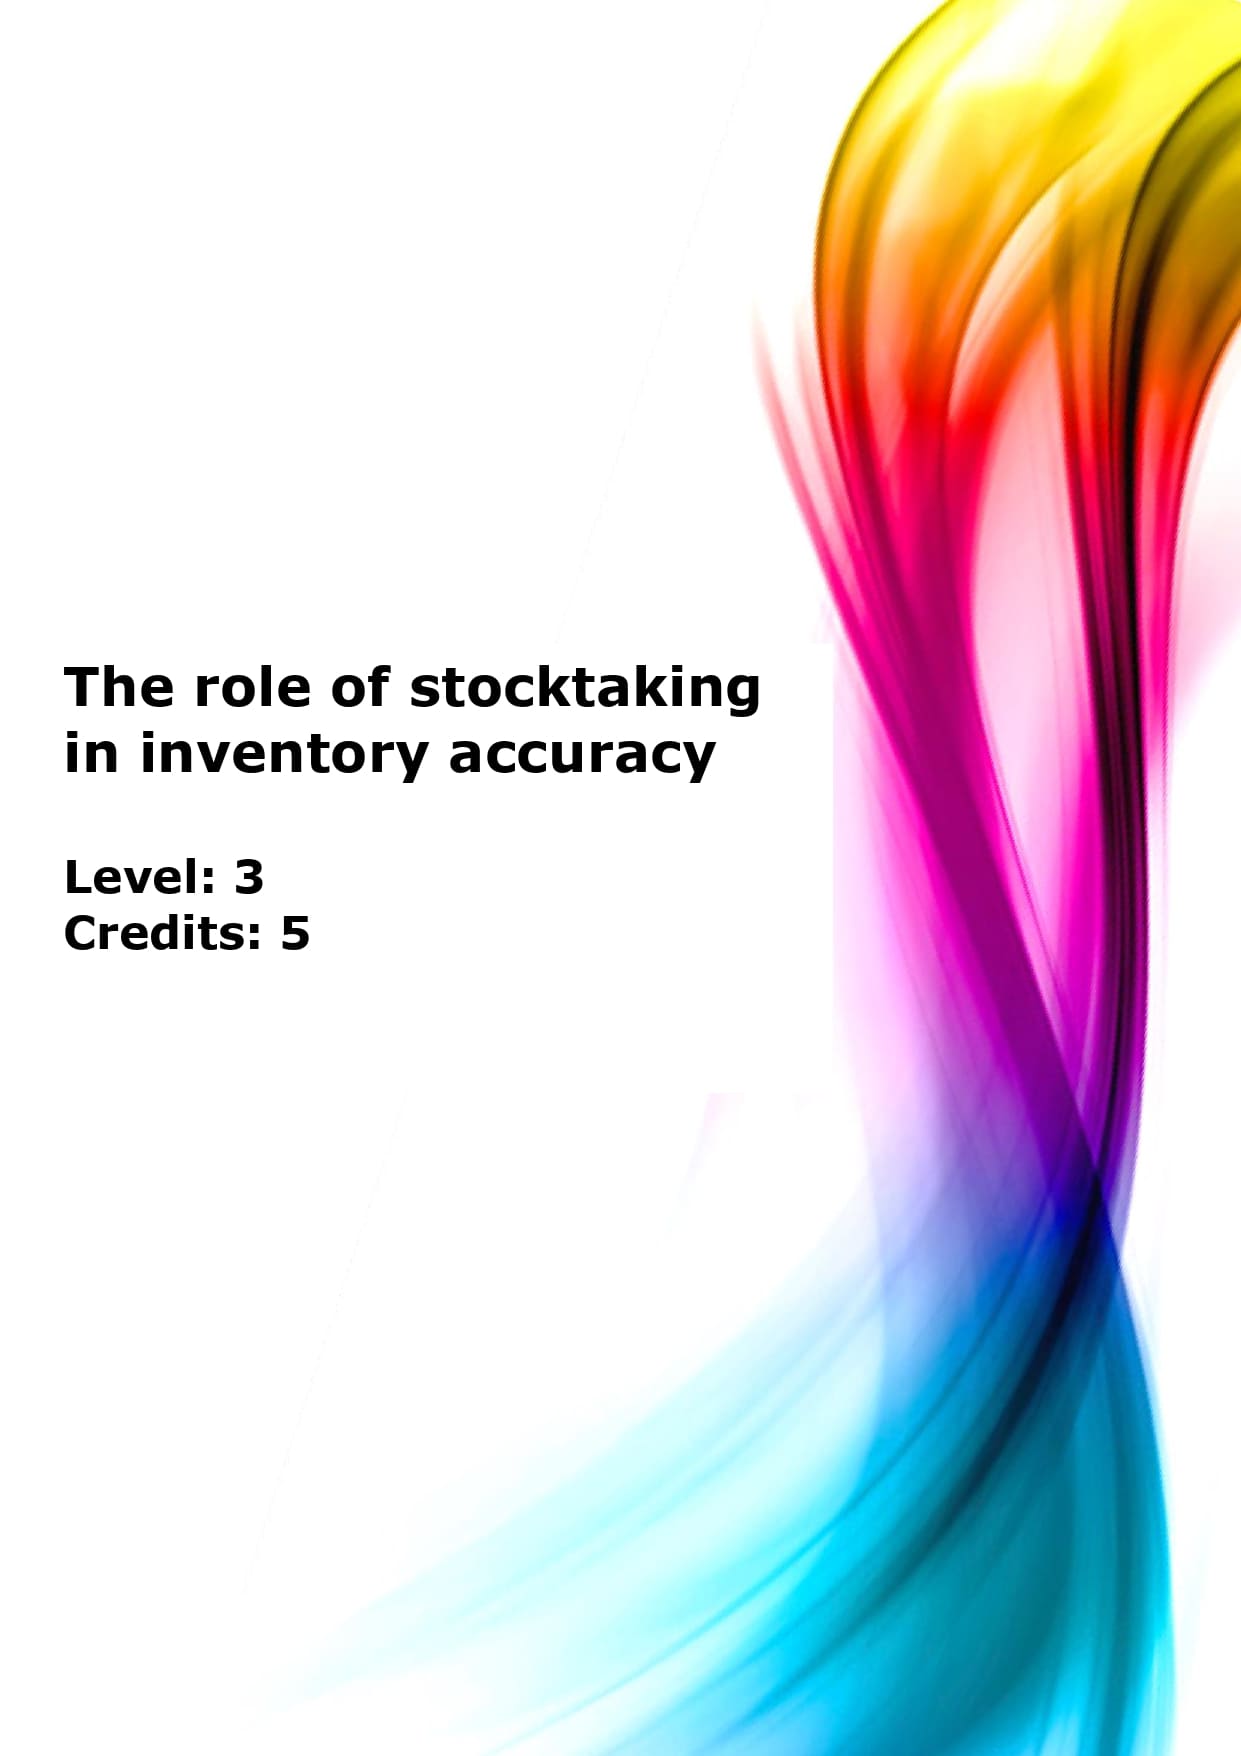 Discuss the role of stocktaking in ensuring inventory accuracy US